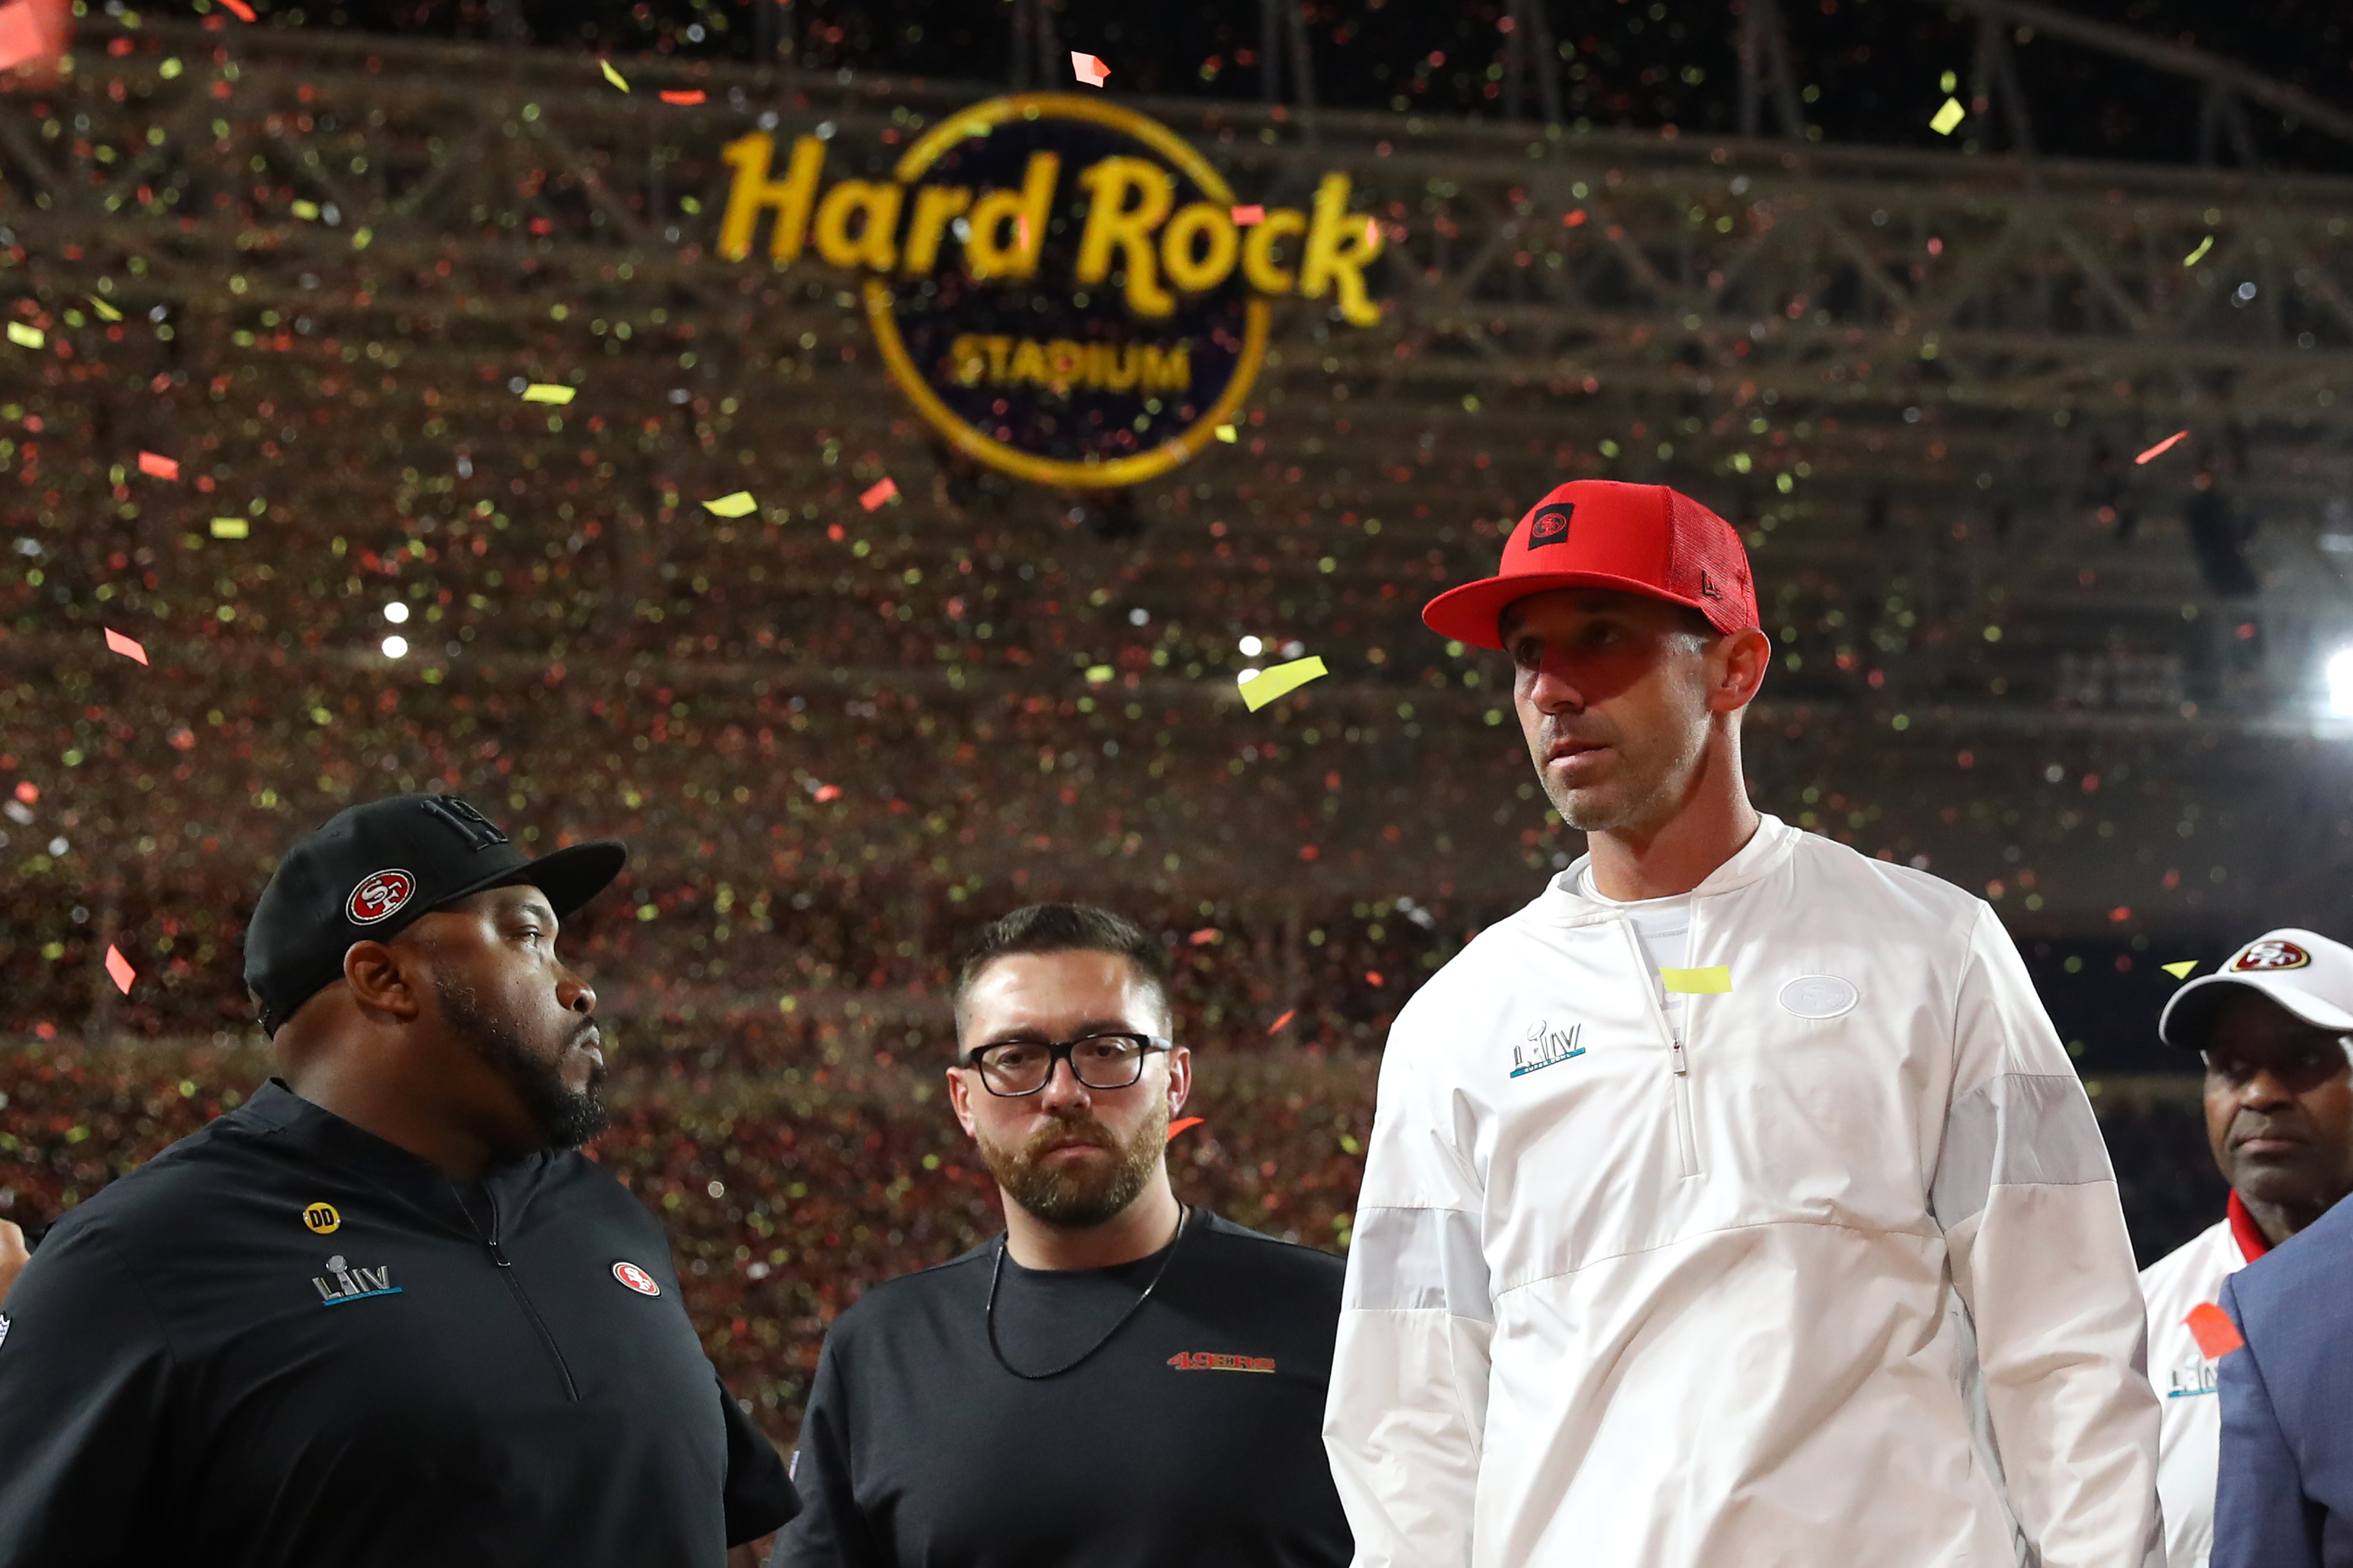 49ers: Super Bowl LIV loss hurts, but the Niners will be back